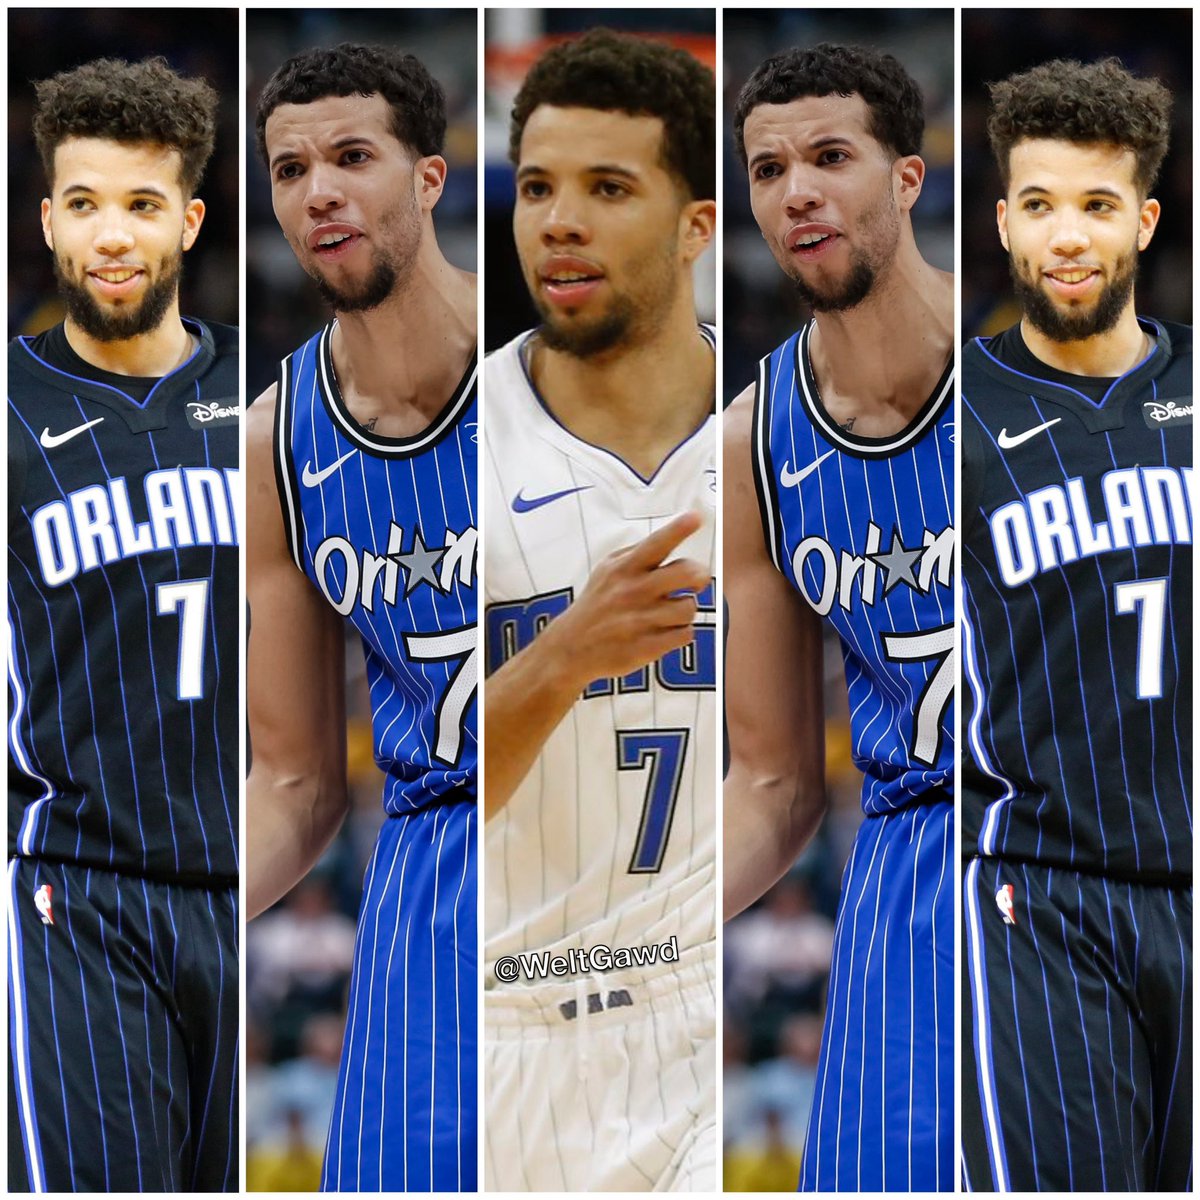 The Orlando Magic starting lineup in the playoffs #PlayoffMode